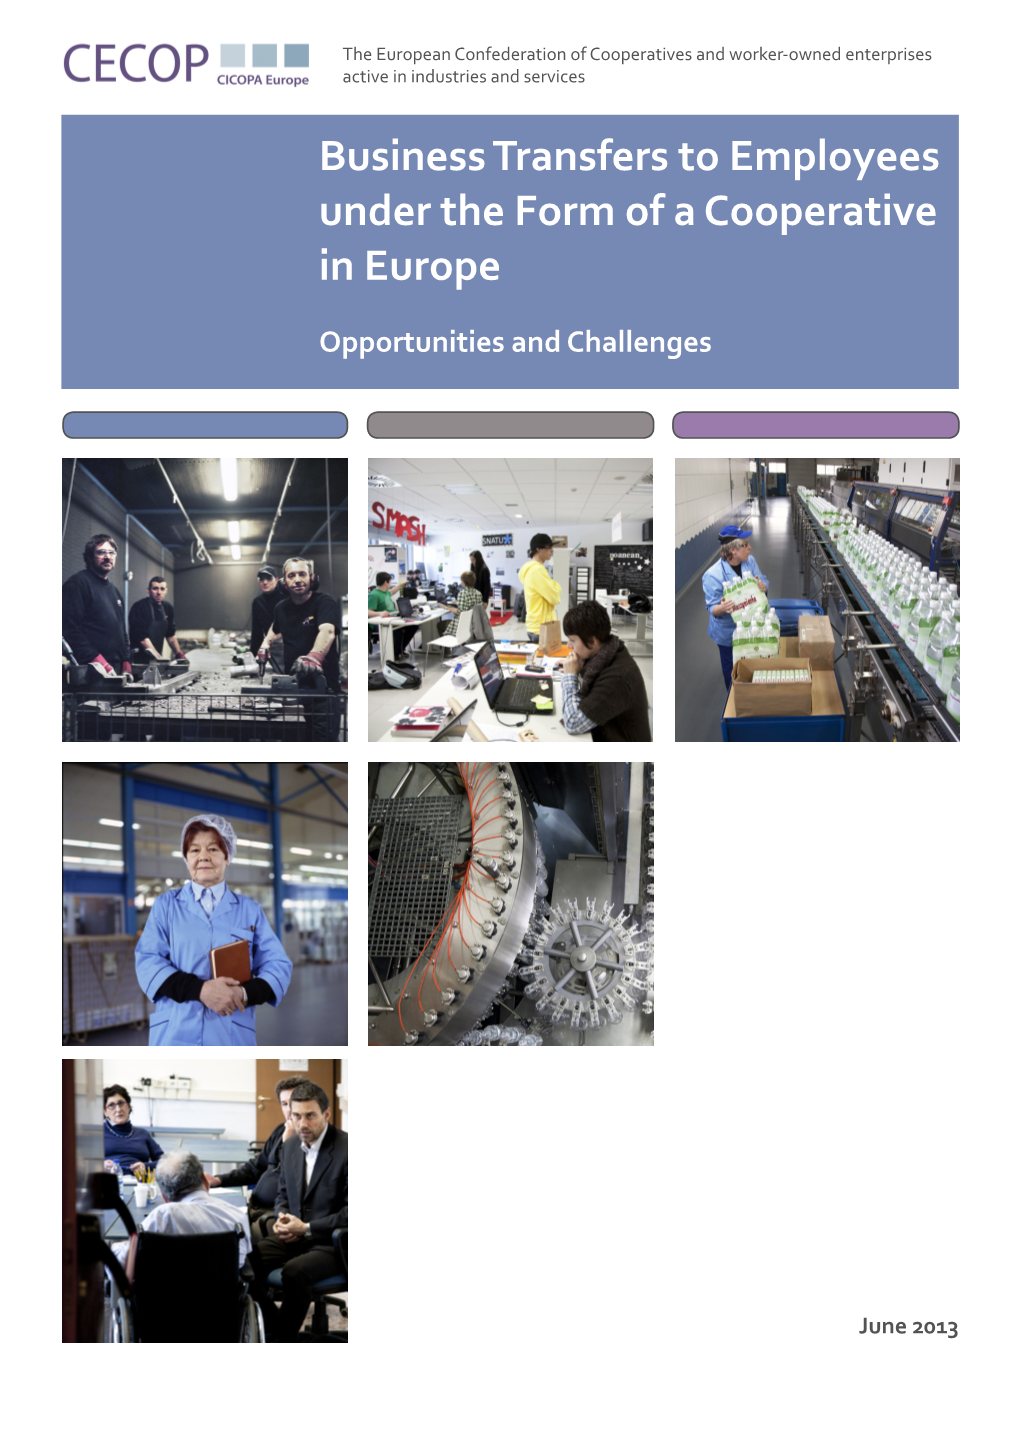 Business Transfers to Employees Under the Form of a Cooperative in Europe